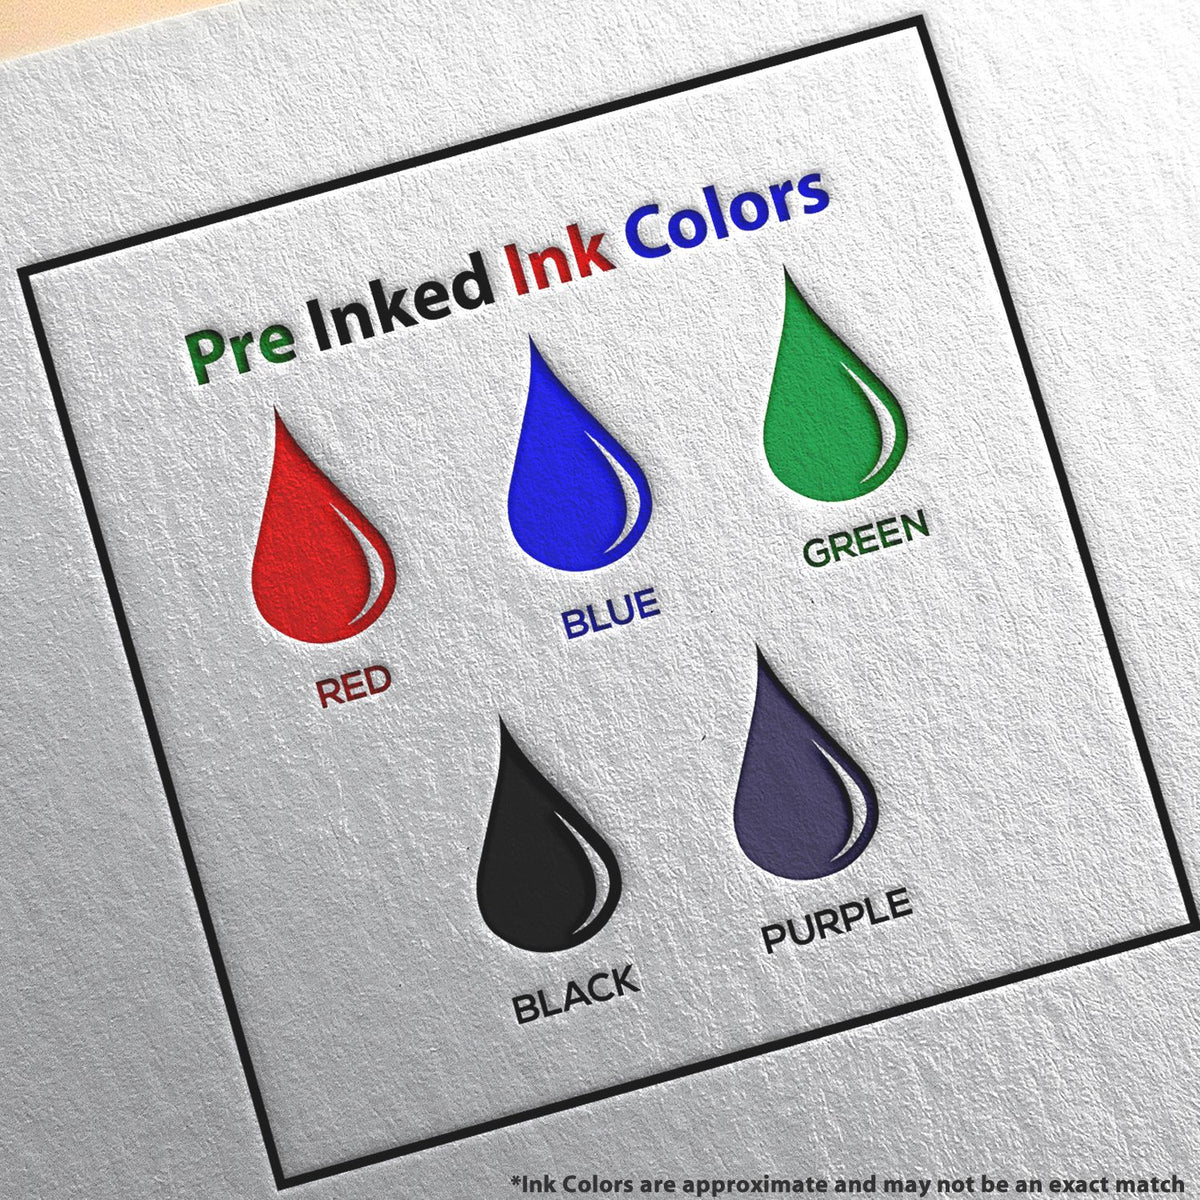 A picture showing the different ink colors or hues available for the Premium MaxLight Pre-Inked Kansas Engineering Stamp product.